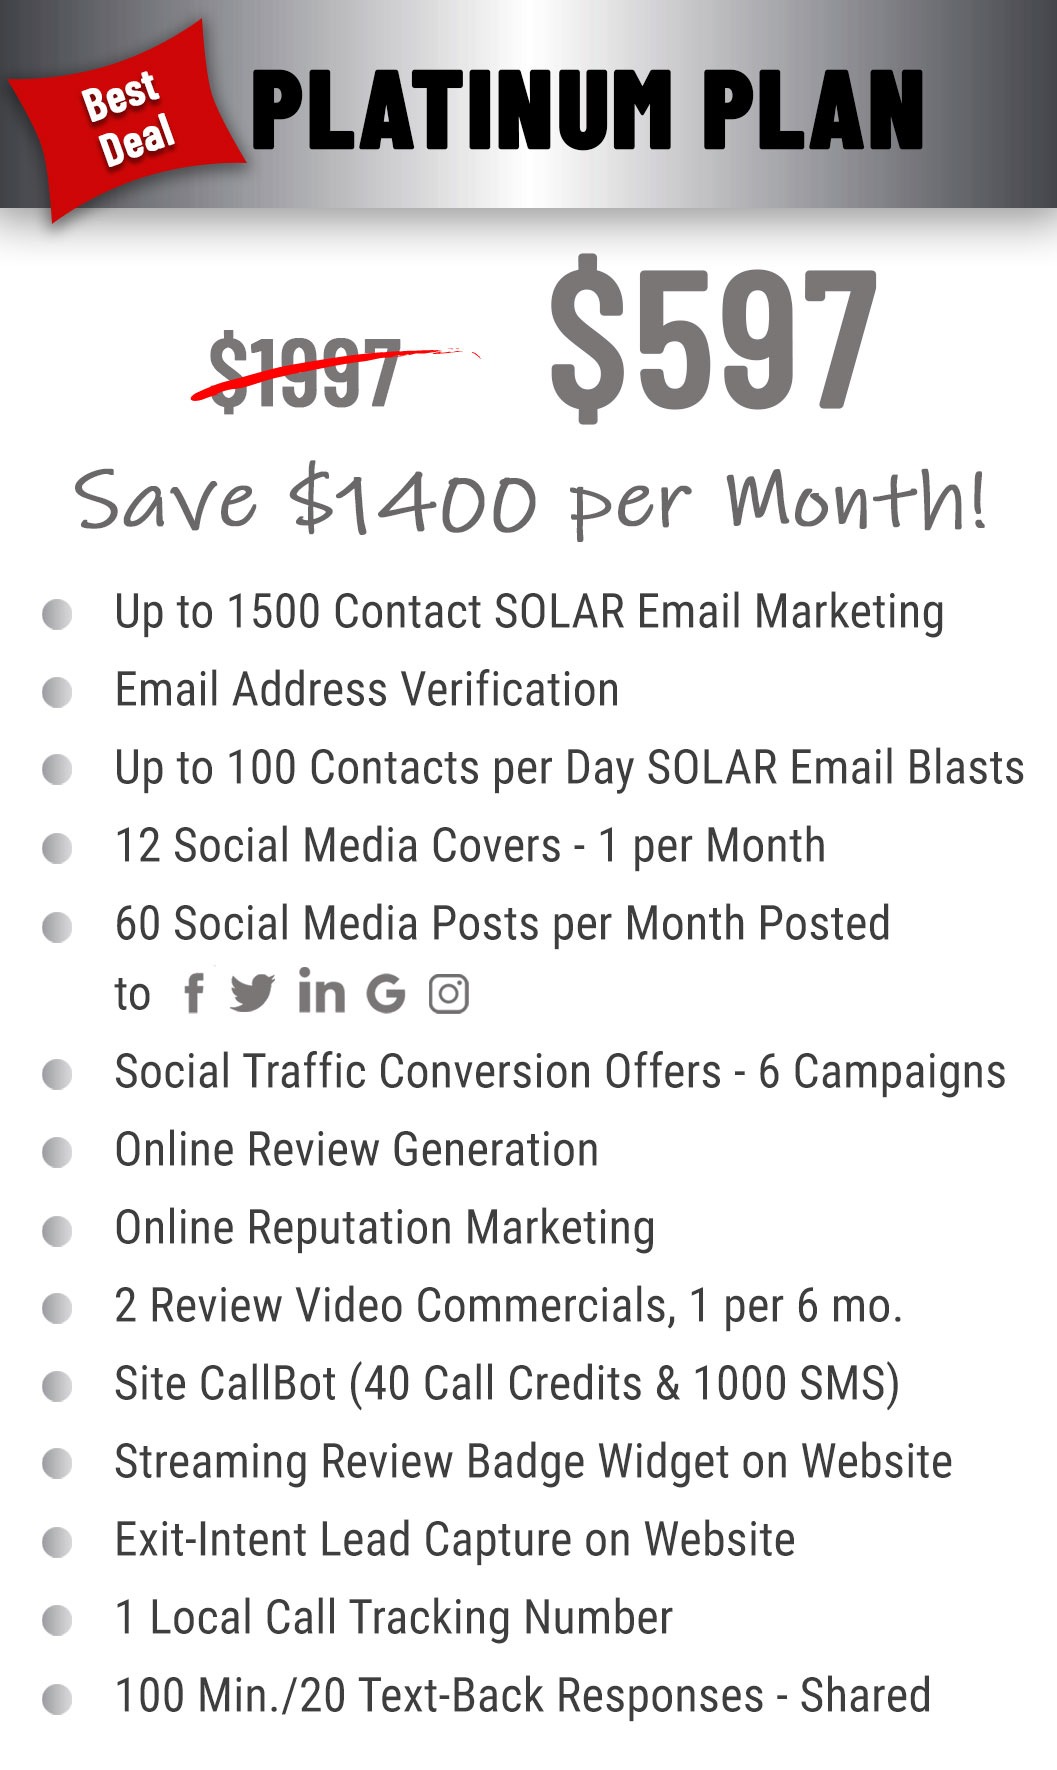 Platinum Plan Pricing and Features SOLAR